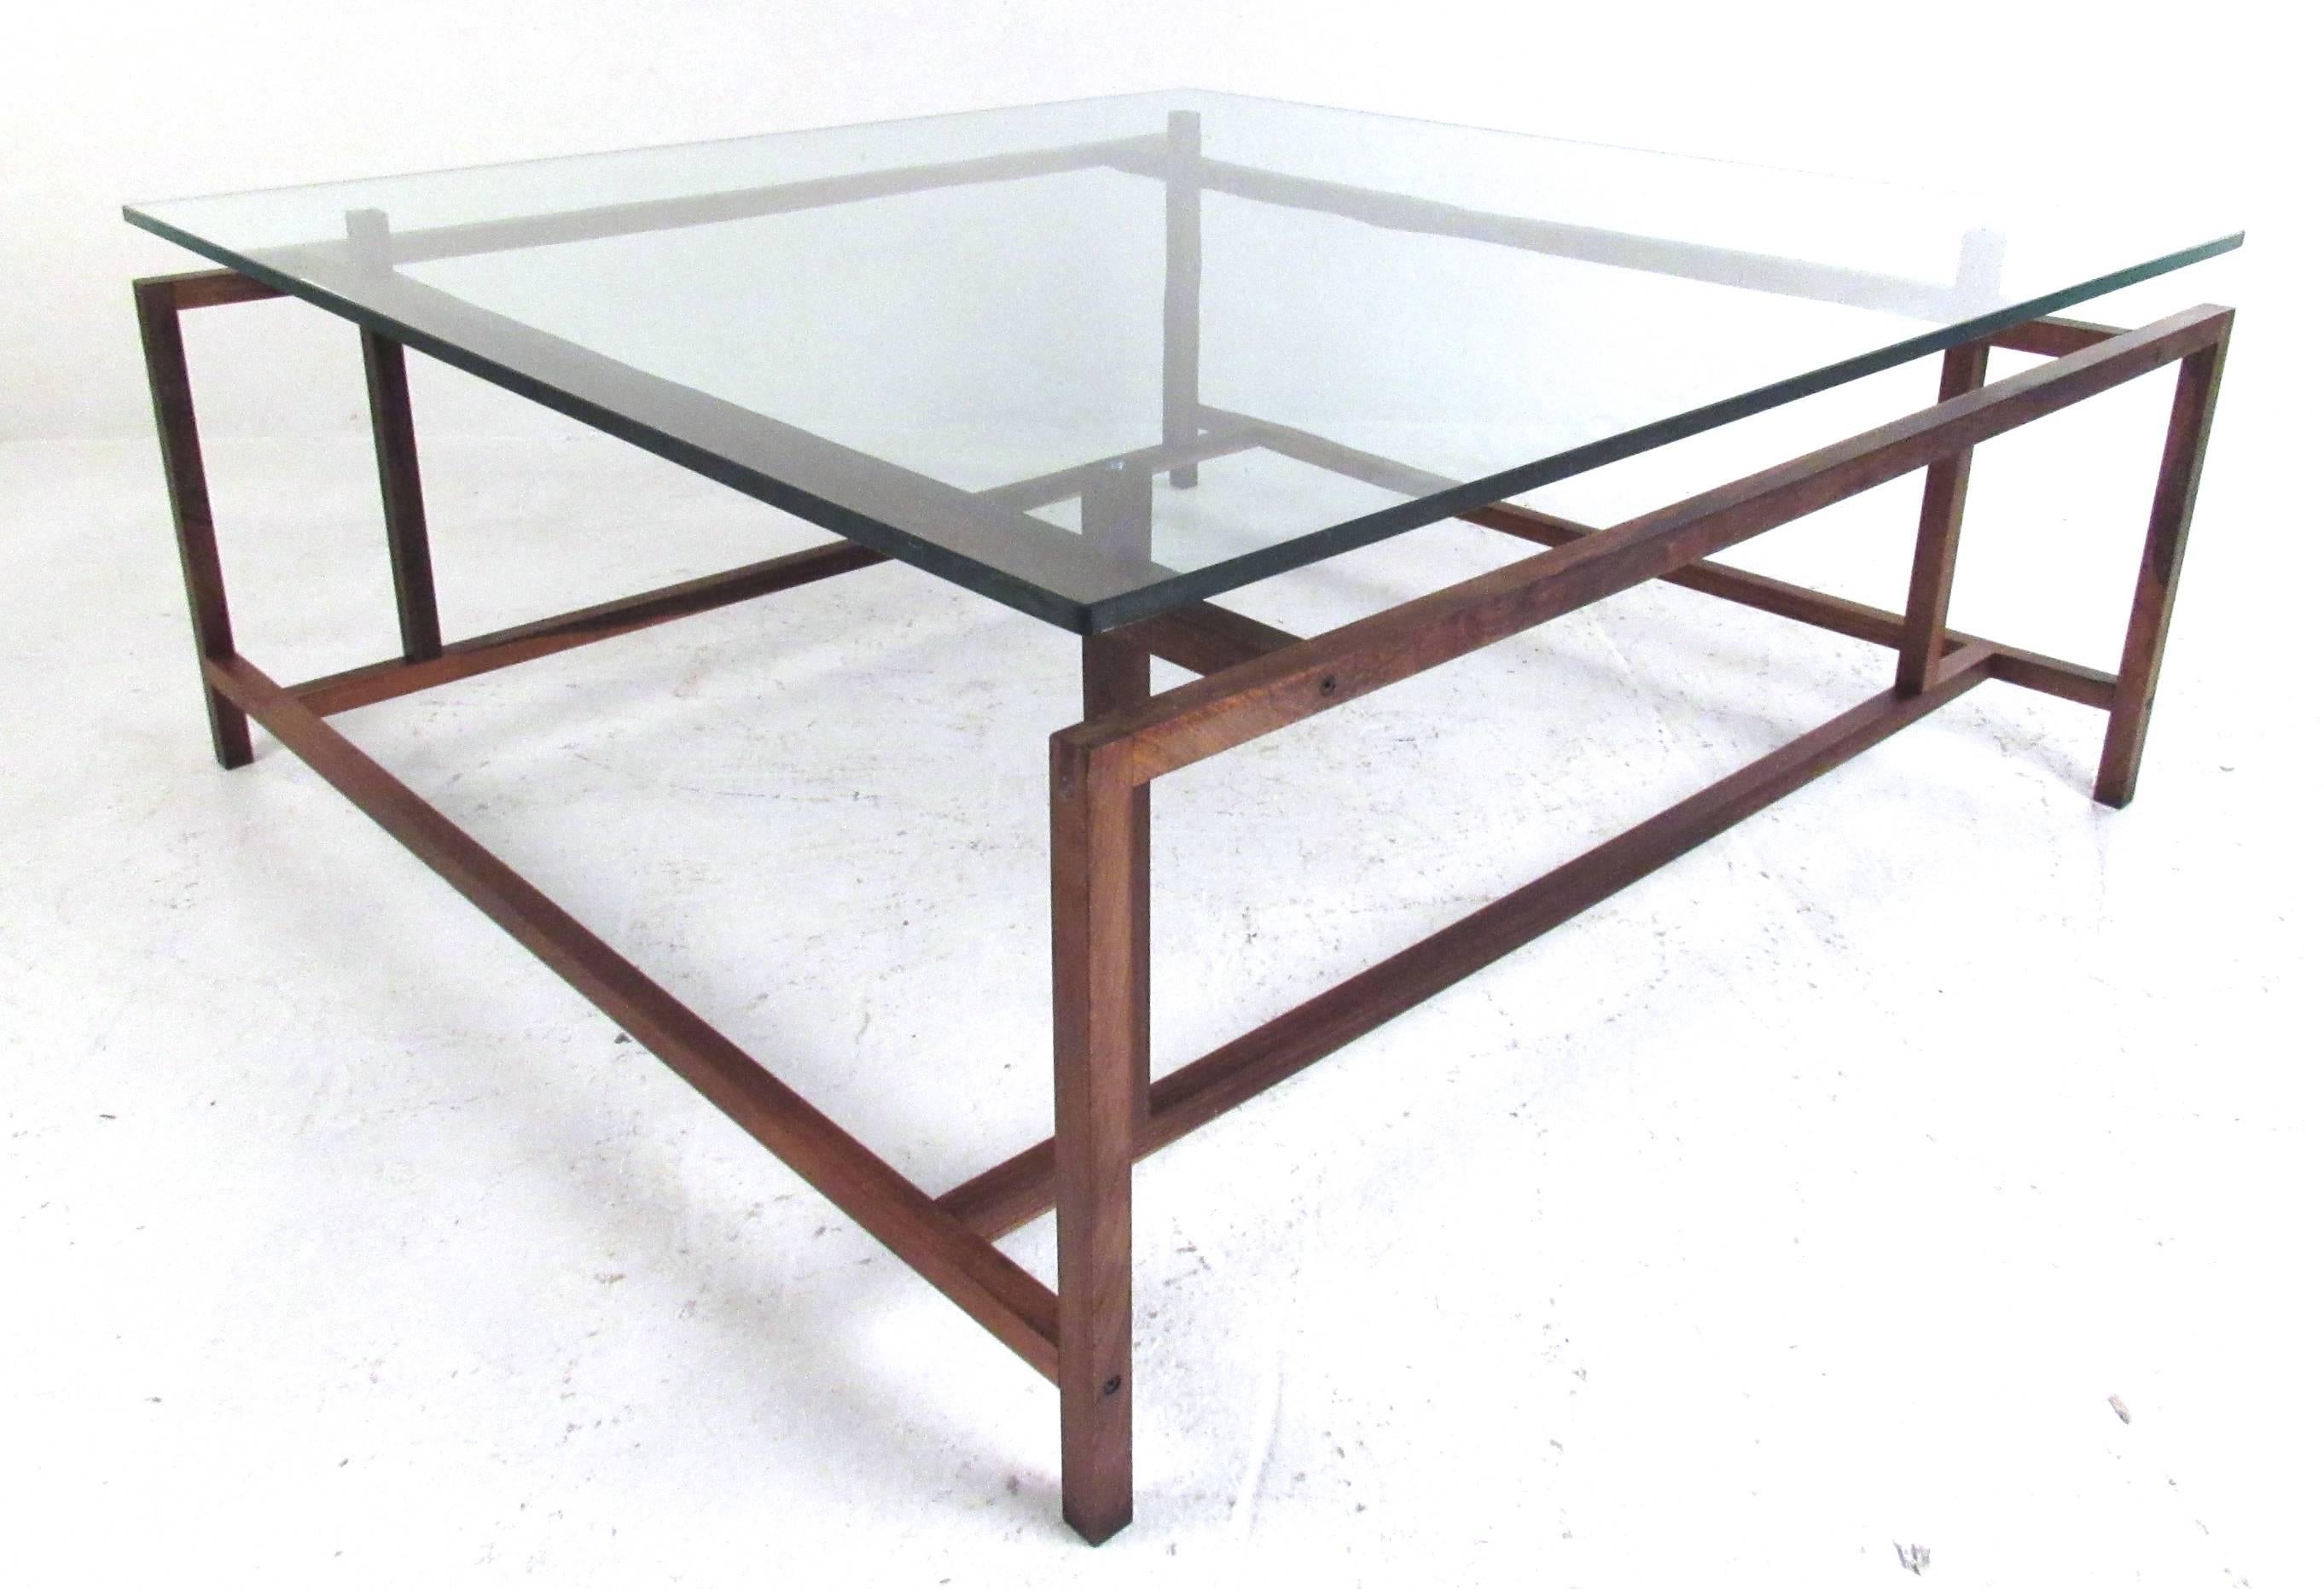 The clean simple lines of this Mid-Century Danish rosewood coffee table features the unique designs of Henning Norgaard. Quality craftsmanship with dovetailing design details make this an impressive vintage modern addition to any interior. Please